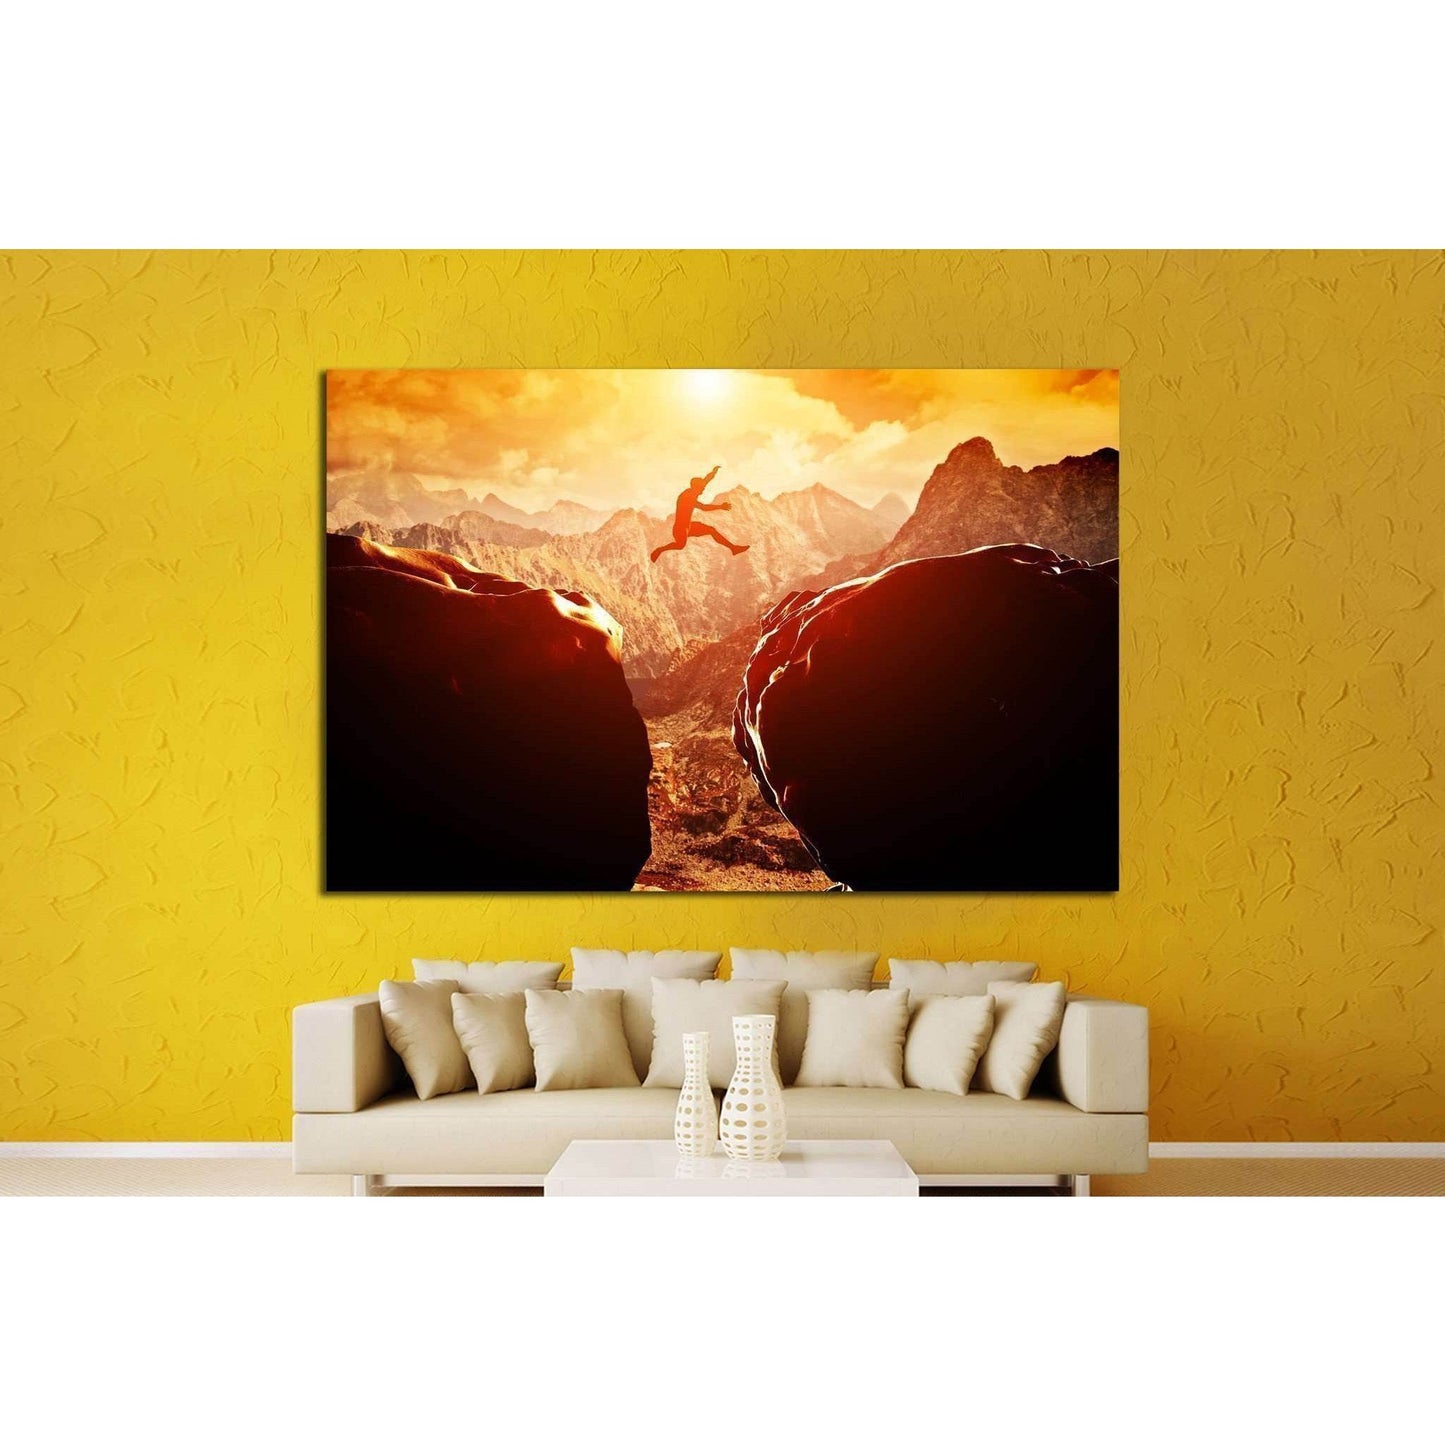 Mountain Base Jump Art Print - Inspirational Extreme Sports Wall ArtThis canvas print depicts an exhilarating scene of a person base jumping between two cliffs with a dramatic mountainous backdrop bathed in the golden hues of the setting or rising sun. It